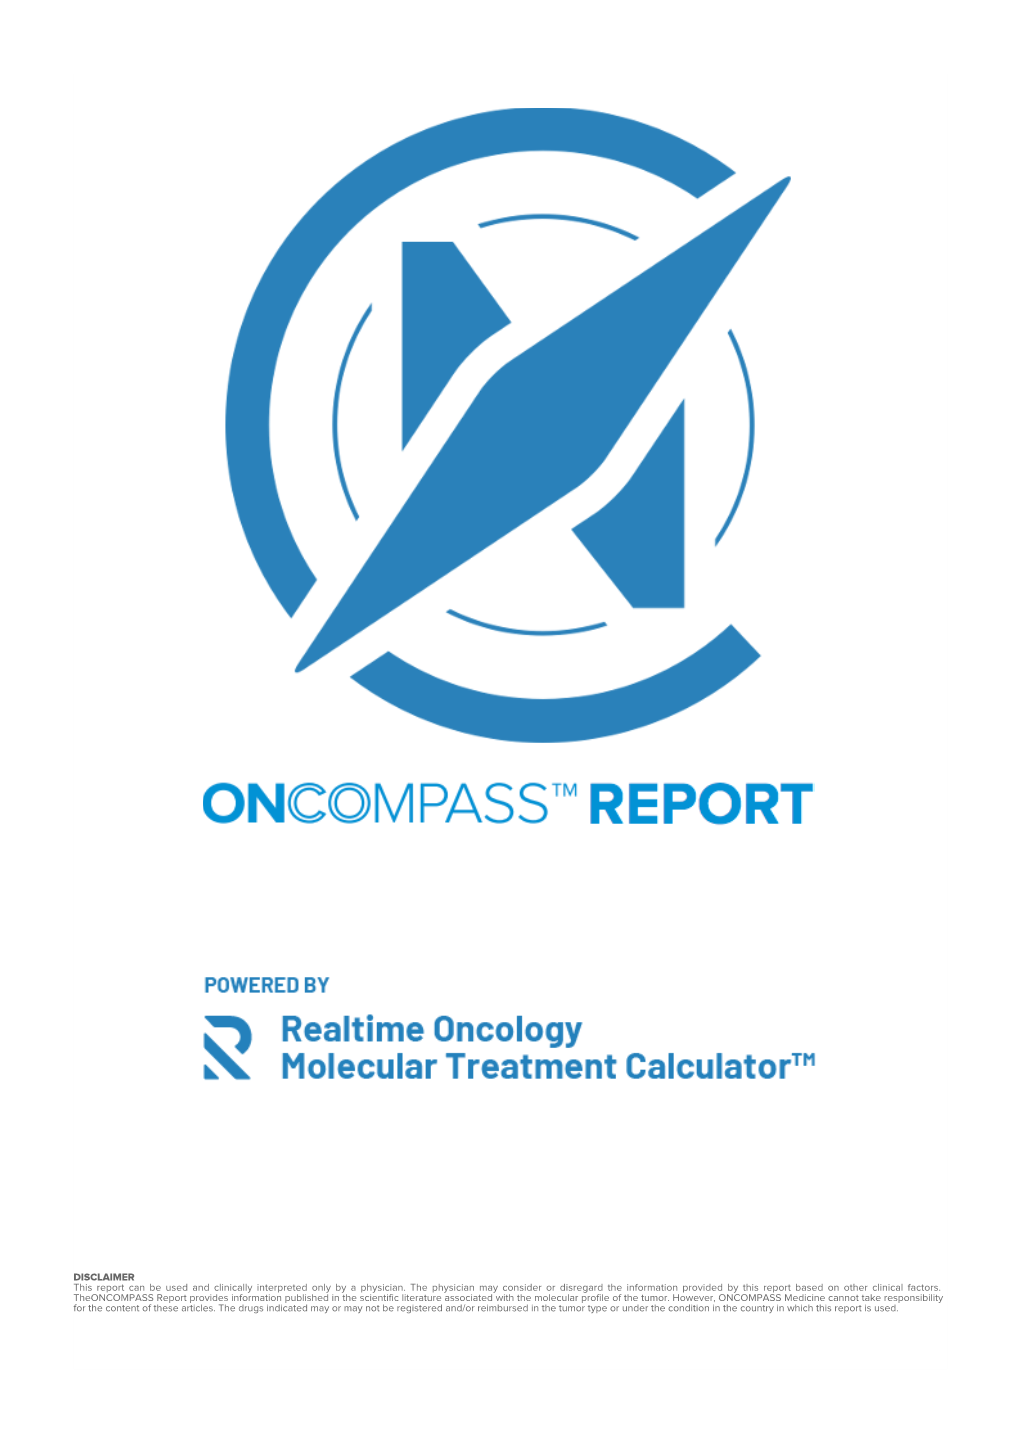 ONCOMPASS Report Provides Information Published in the Scientific Literature Associated with the Molecular Profile of the Tumor